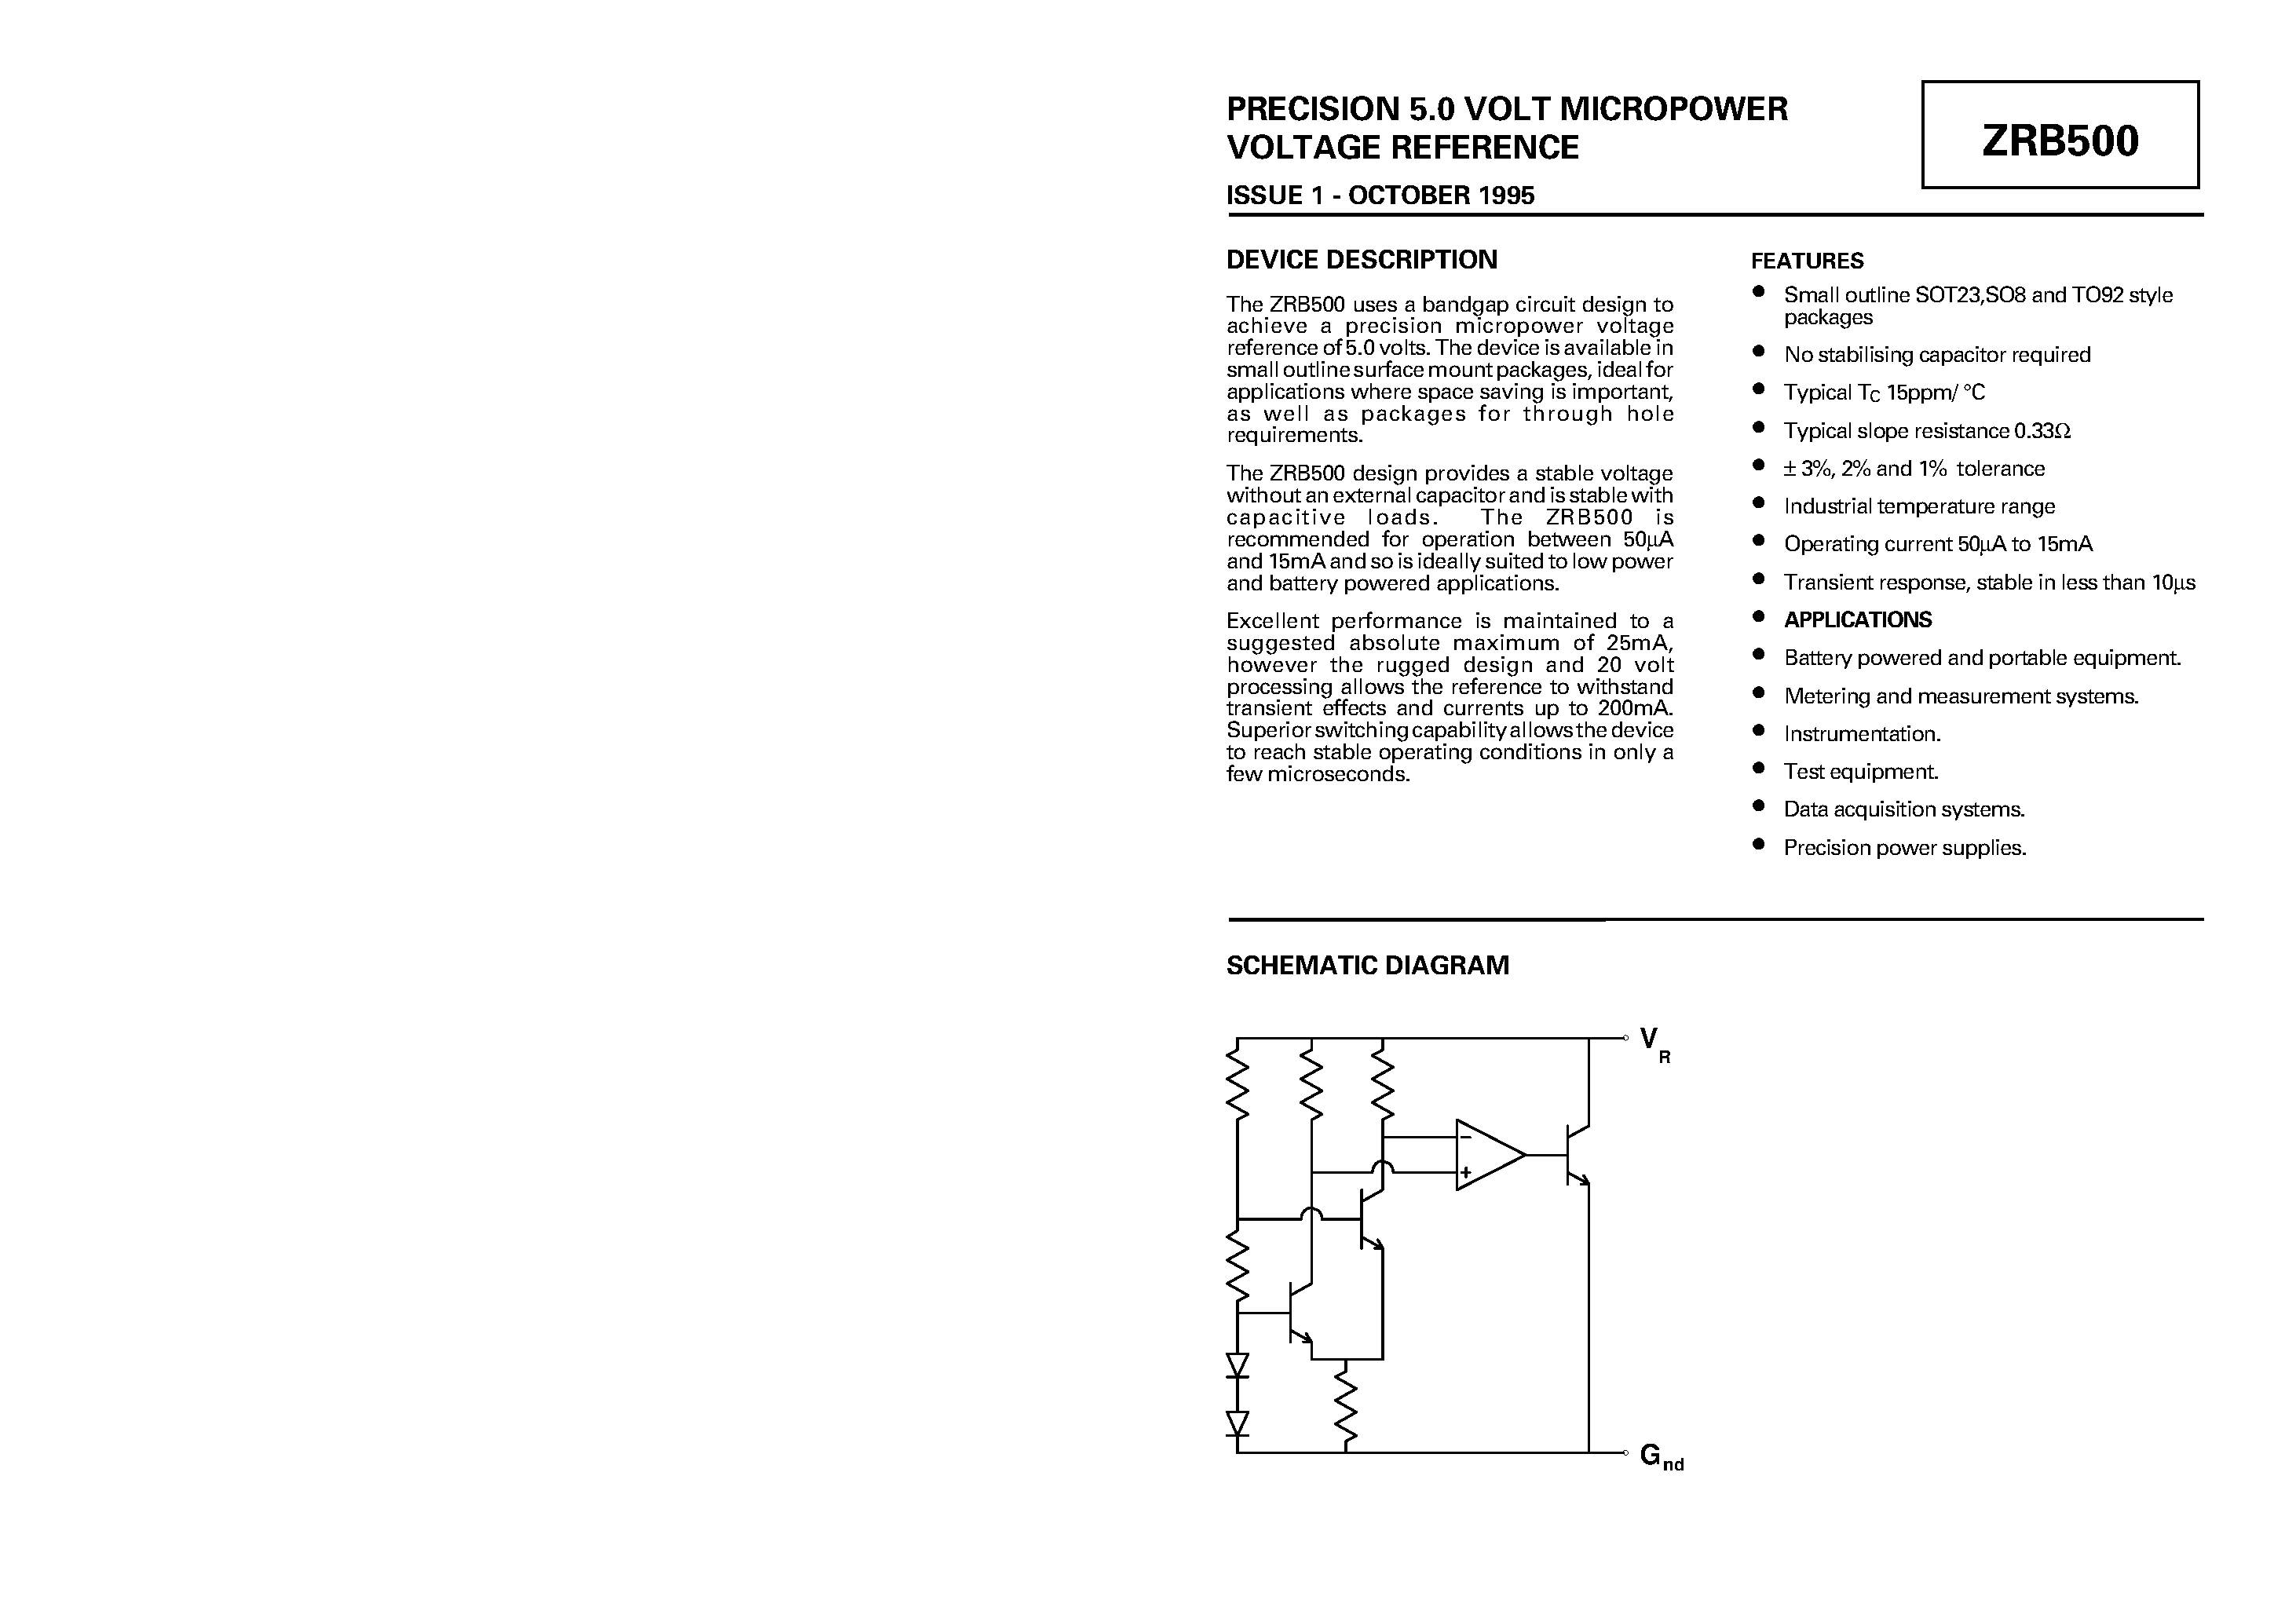 Datasheet ZRB500N801 - PRECISION 5.0 VOLT MICROPOWER VOLTAGE REFERENCE page 1